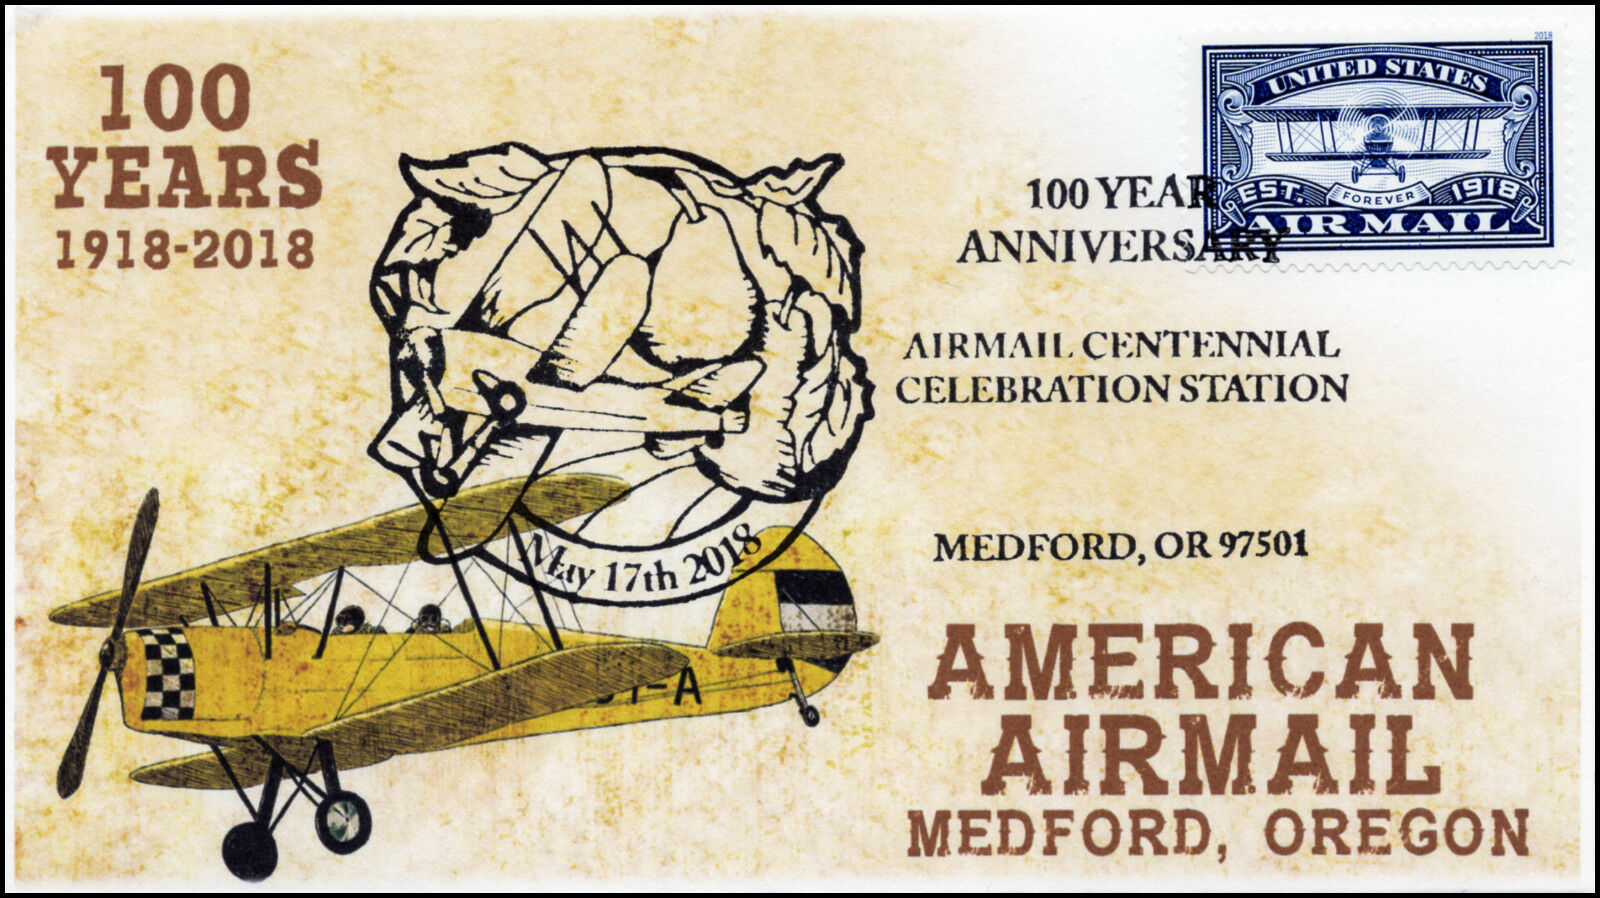 18-357, 2018, Air Mail, Pictorial Postmark, Event Cover, Medford Or, Blue Stamp